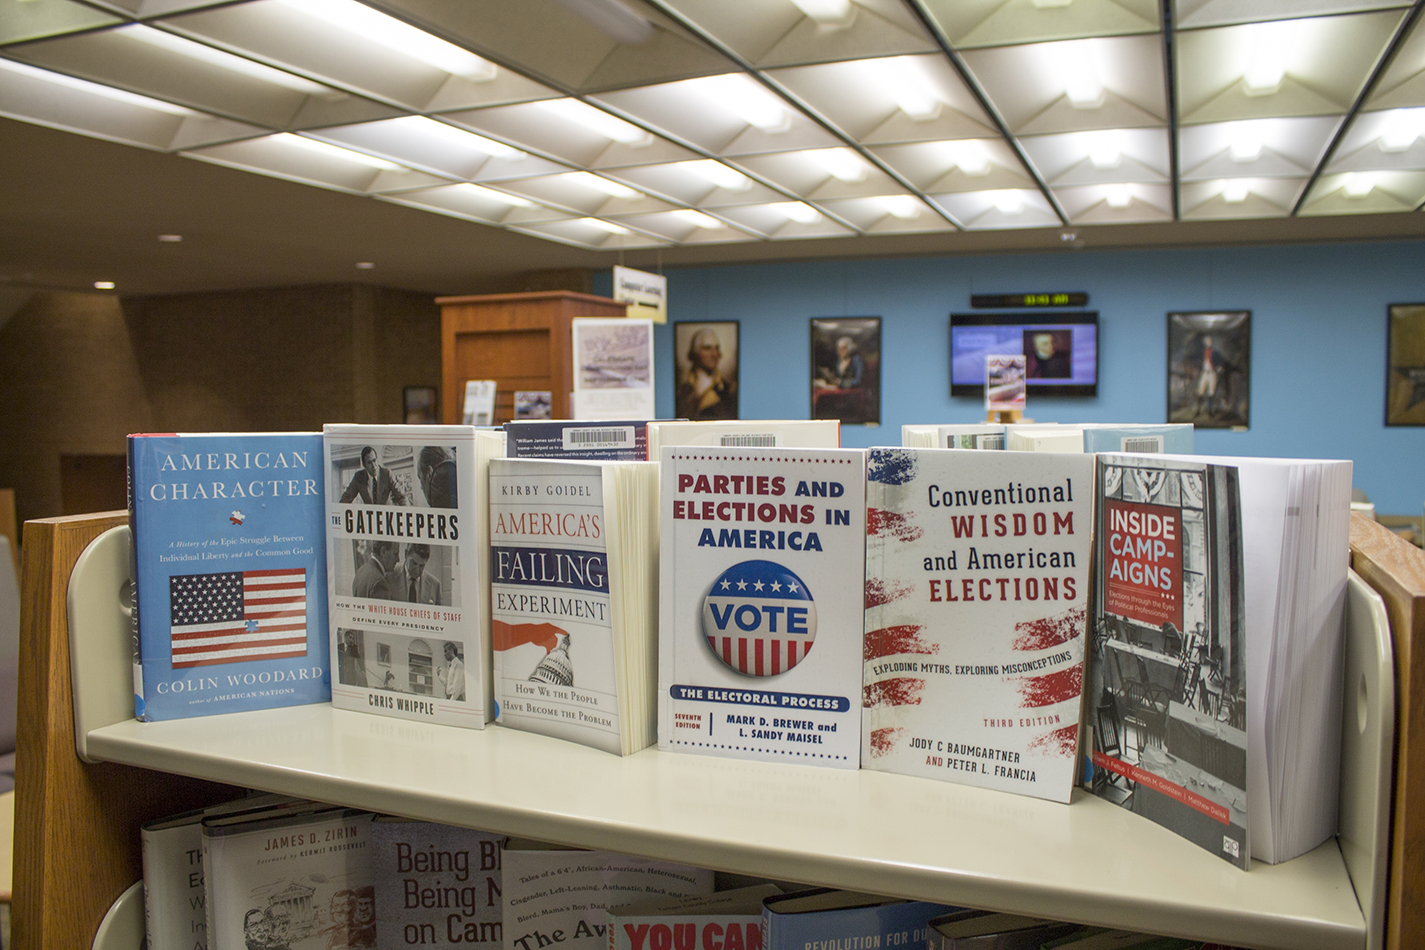 The “We the People...” Constitution Day exhibit’s book display highlights materials from the NE library’s collection. Visitors can read about the Founding Fathers and enjoy various art and memorabilia from early American history.